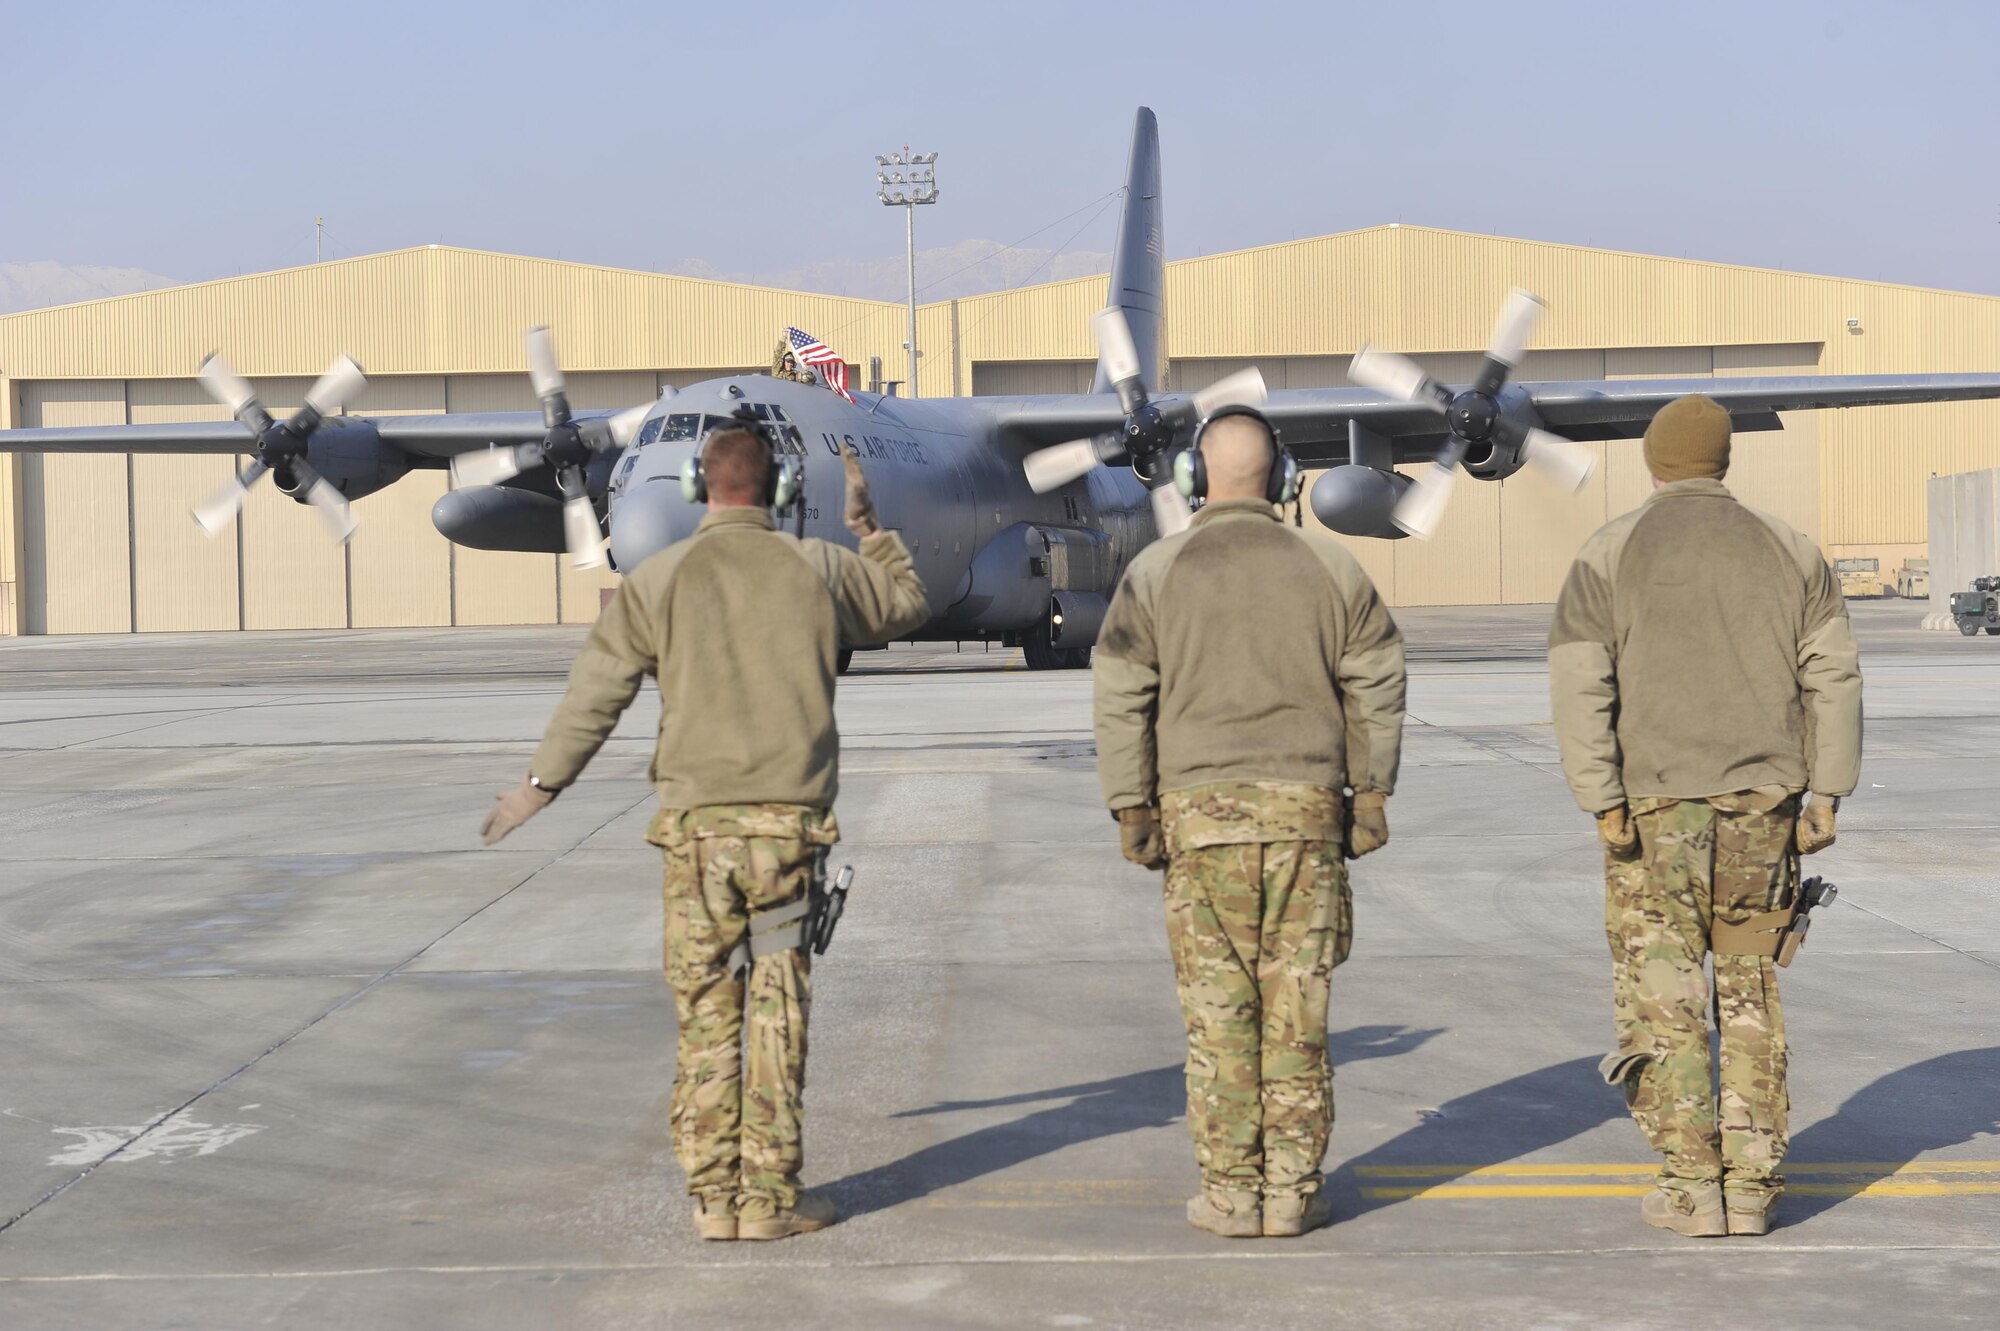 Tech. Sgt. Keith LaFontaine, accompanied by Senior Airman Larry Webster and Tech. Sgt. Richard Mulhollen, marshals out a C-130H Hercules Jan. 9, 2013, before its flight out of Bagram Airfield, Afghanistan. The aircraft was the first of the C-130H model aircraft to permanently relocate out of Bagram to make room for the newer C-130J model aircraft. (U.S. Air Force photo/Senior Master Sgt. Gary J. Rihn)